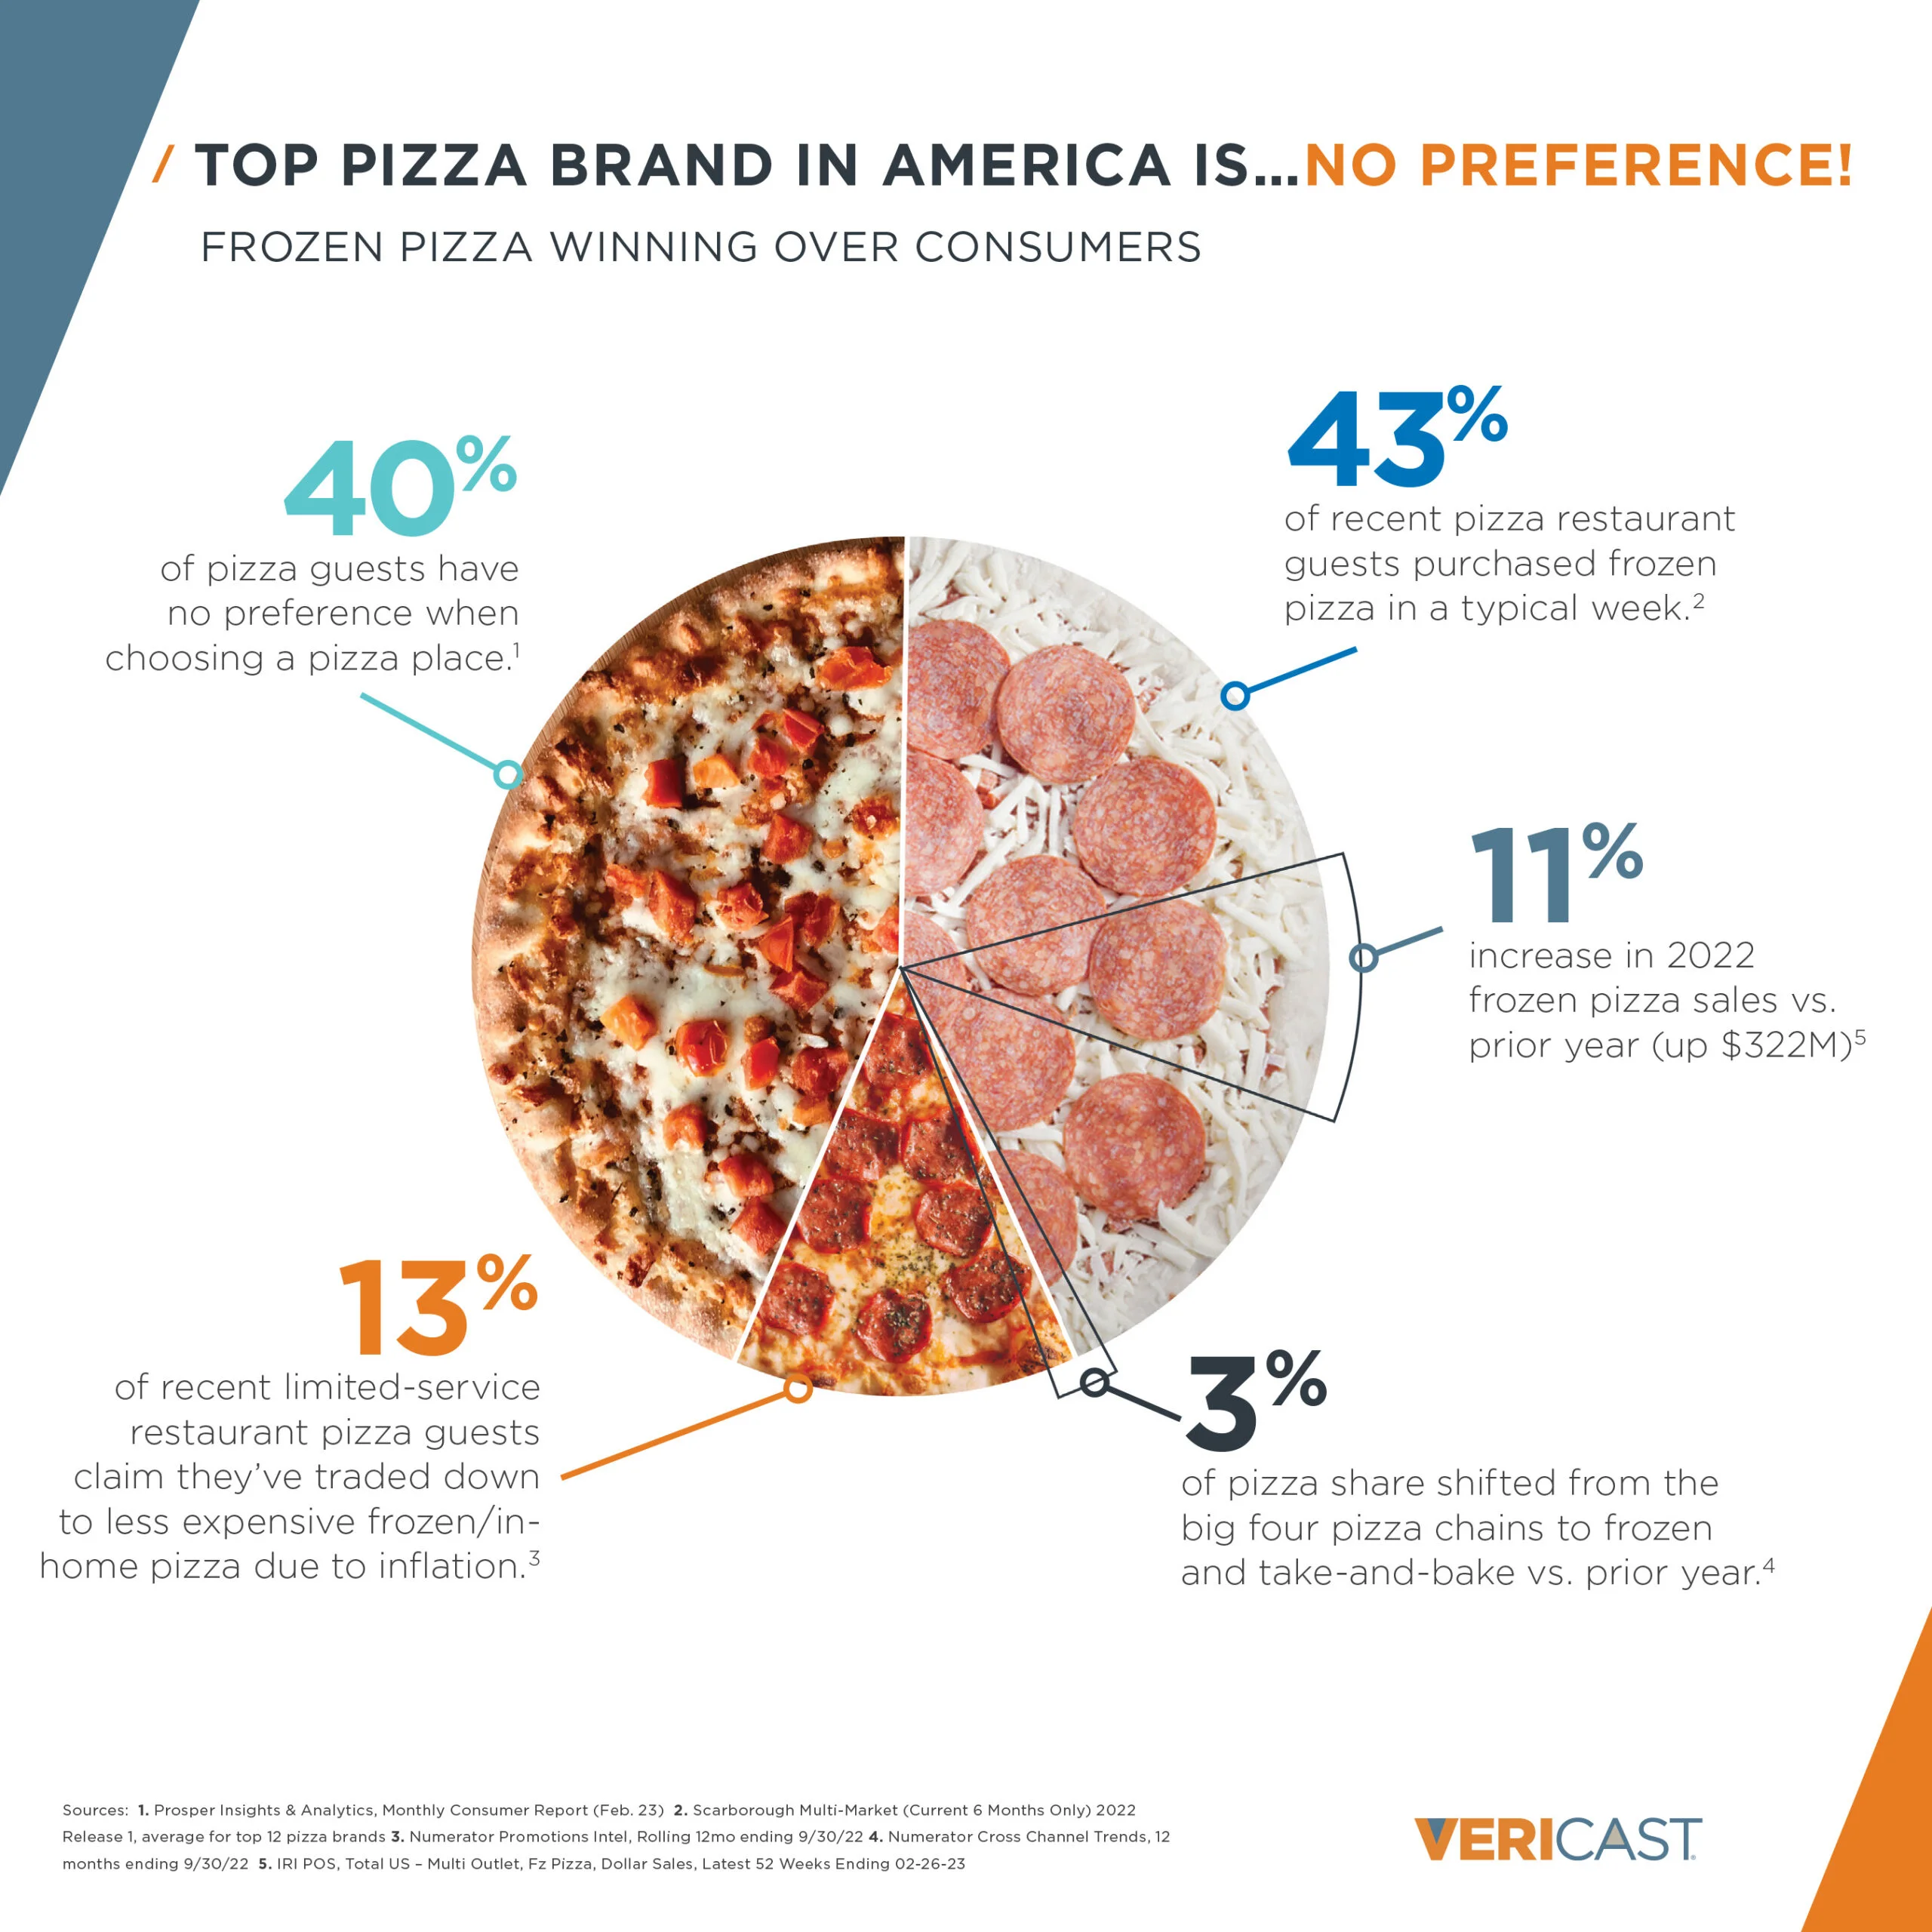 Top Pizza Brand in America is No Preference! Frozen Pizza Winning Over Consumers